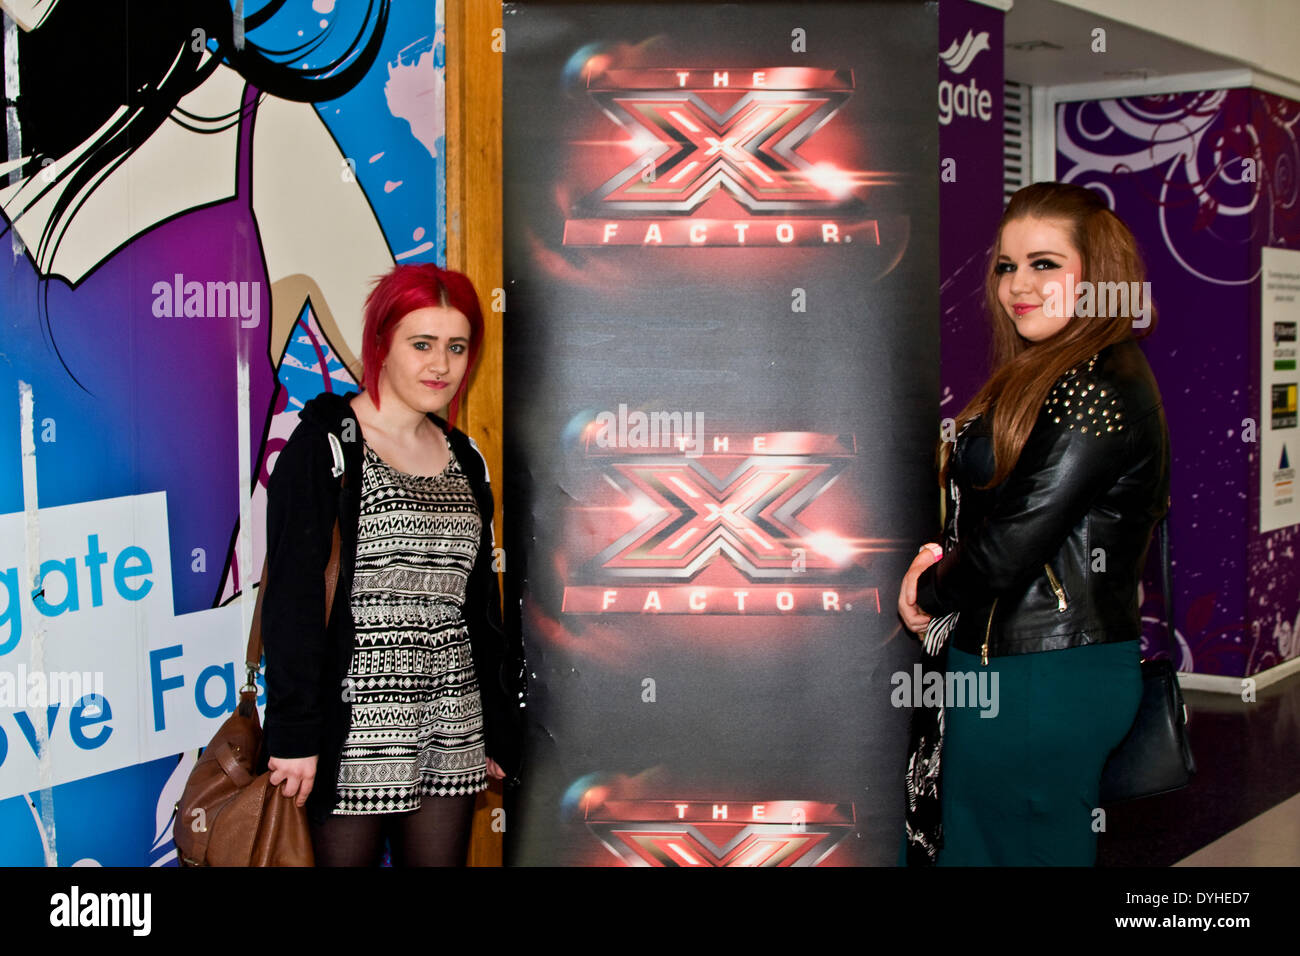 Dundee, Scotland, UK. 18th April, 2014. X Factor Auditions Wellgate Shopping Centre. This is Mobile Audition Tour on a come first served basis. This year The X Factor auditions will be visiting a massive 43 towns and cities across the country. Rebecca Ferguson joins Simon Cowell & Cheryl Cole are on the hunt for the next pop superstar. Credit:  Dundee Photographics / Alamy Live News Stock Photo